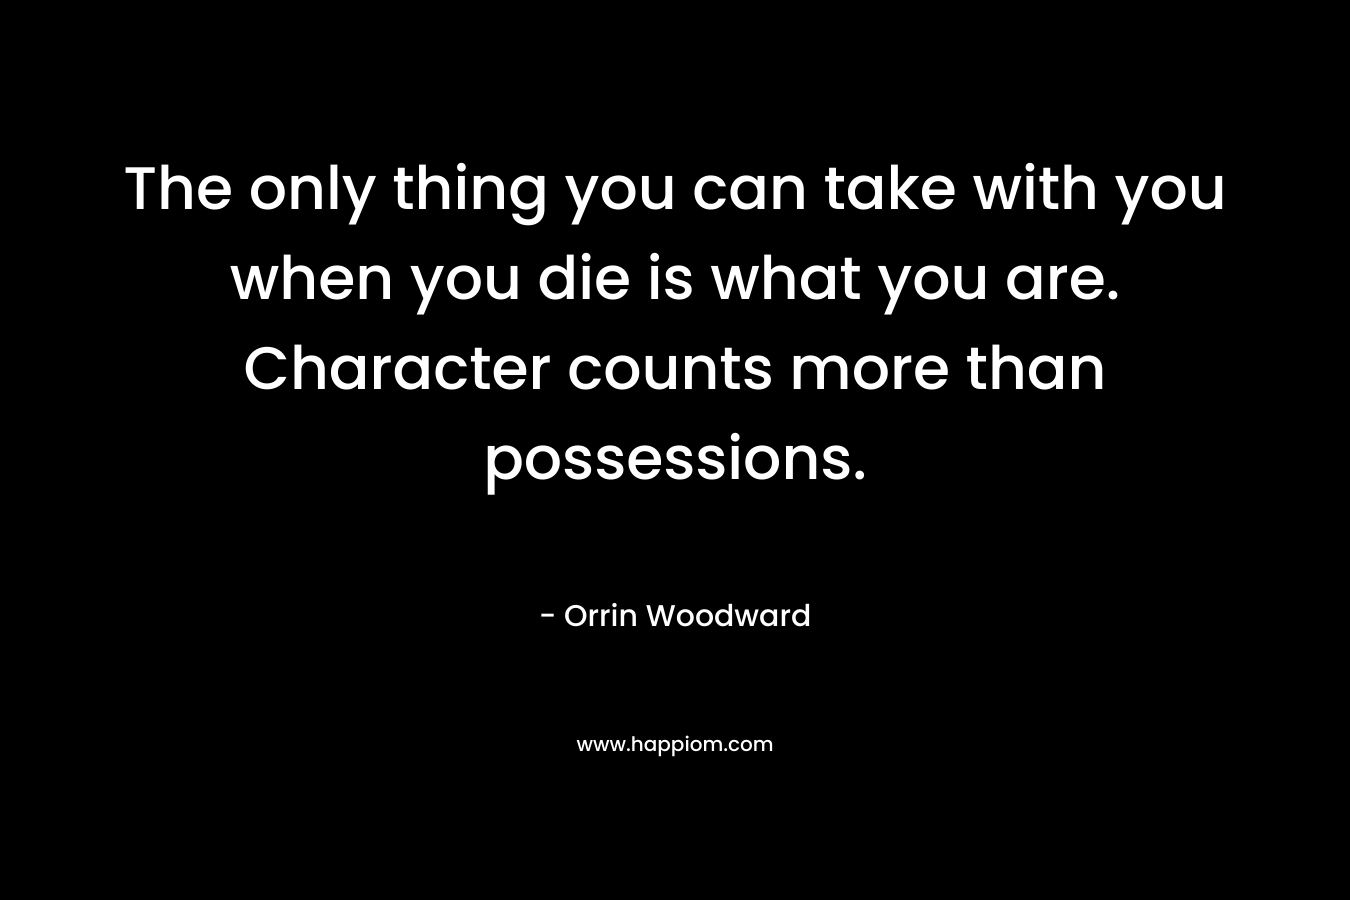 The only thing you can take with you when you die is what you are. Character counts more than possessions. – Orrin Woodward